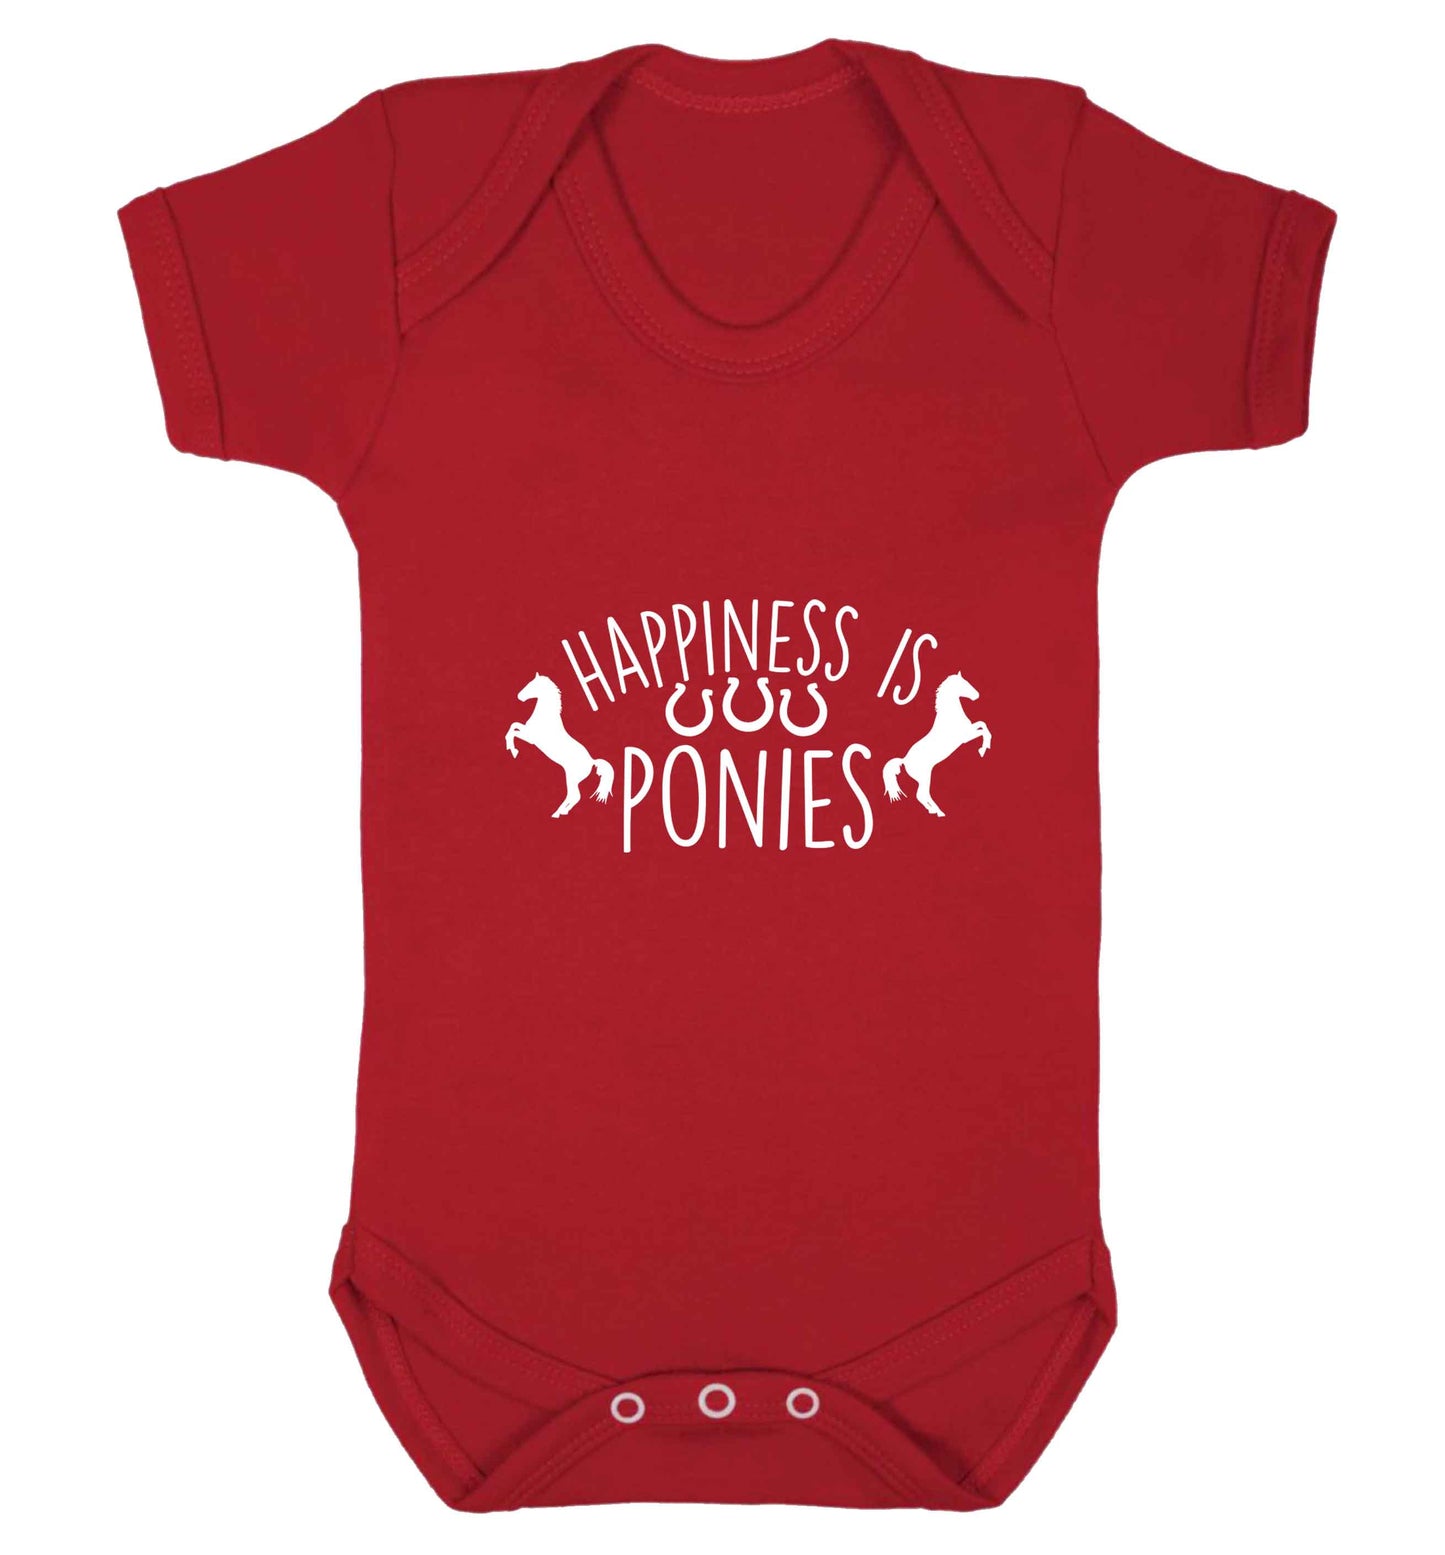 Happiness is ponies baby vest red 18-24 months